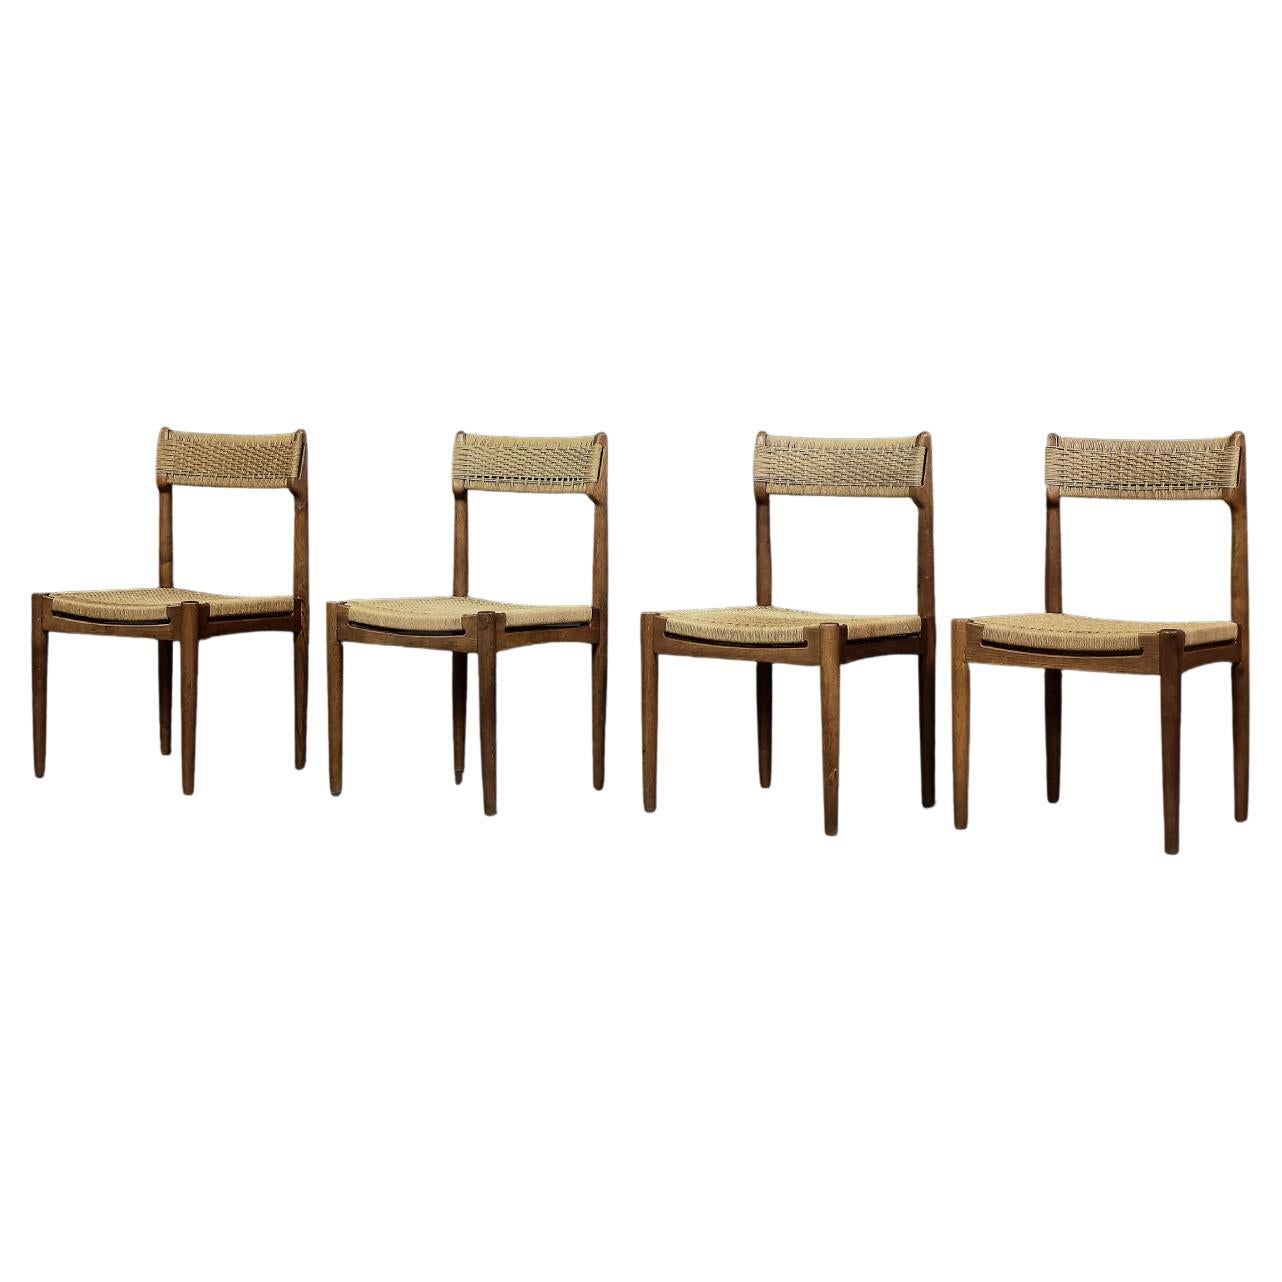 Set of 4 Vintage Mid-Century Modern Scandinavian Dining Chairs in Oak&Paper Cord For Sale